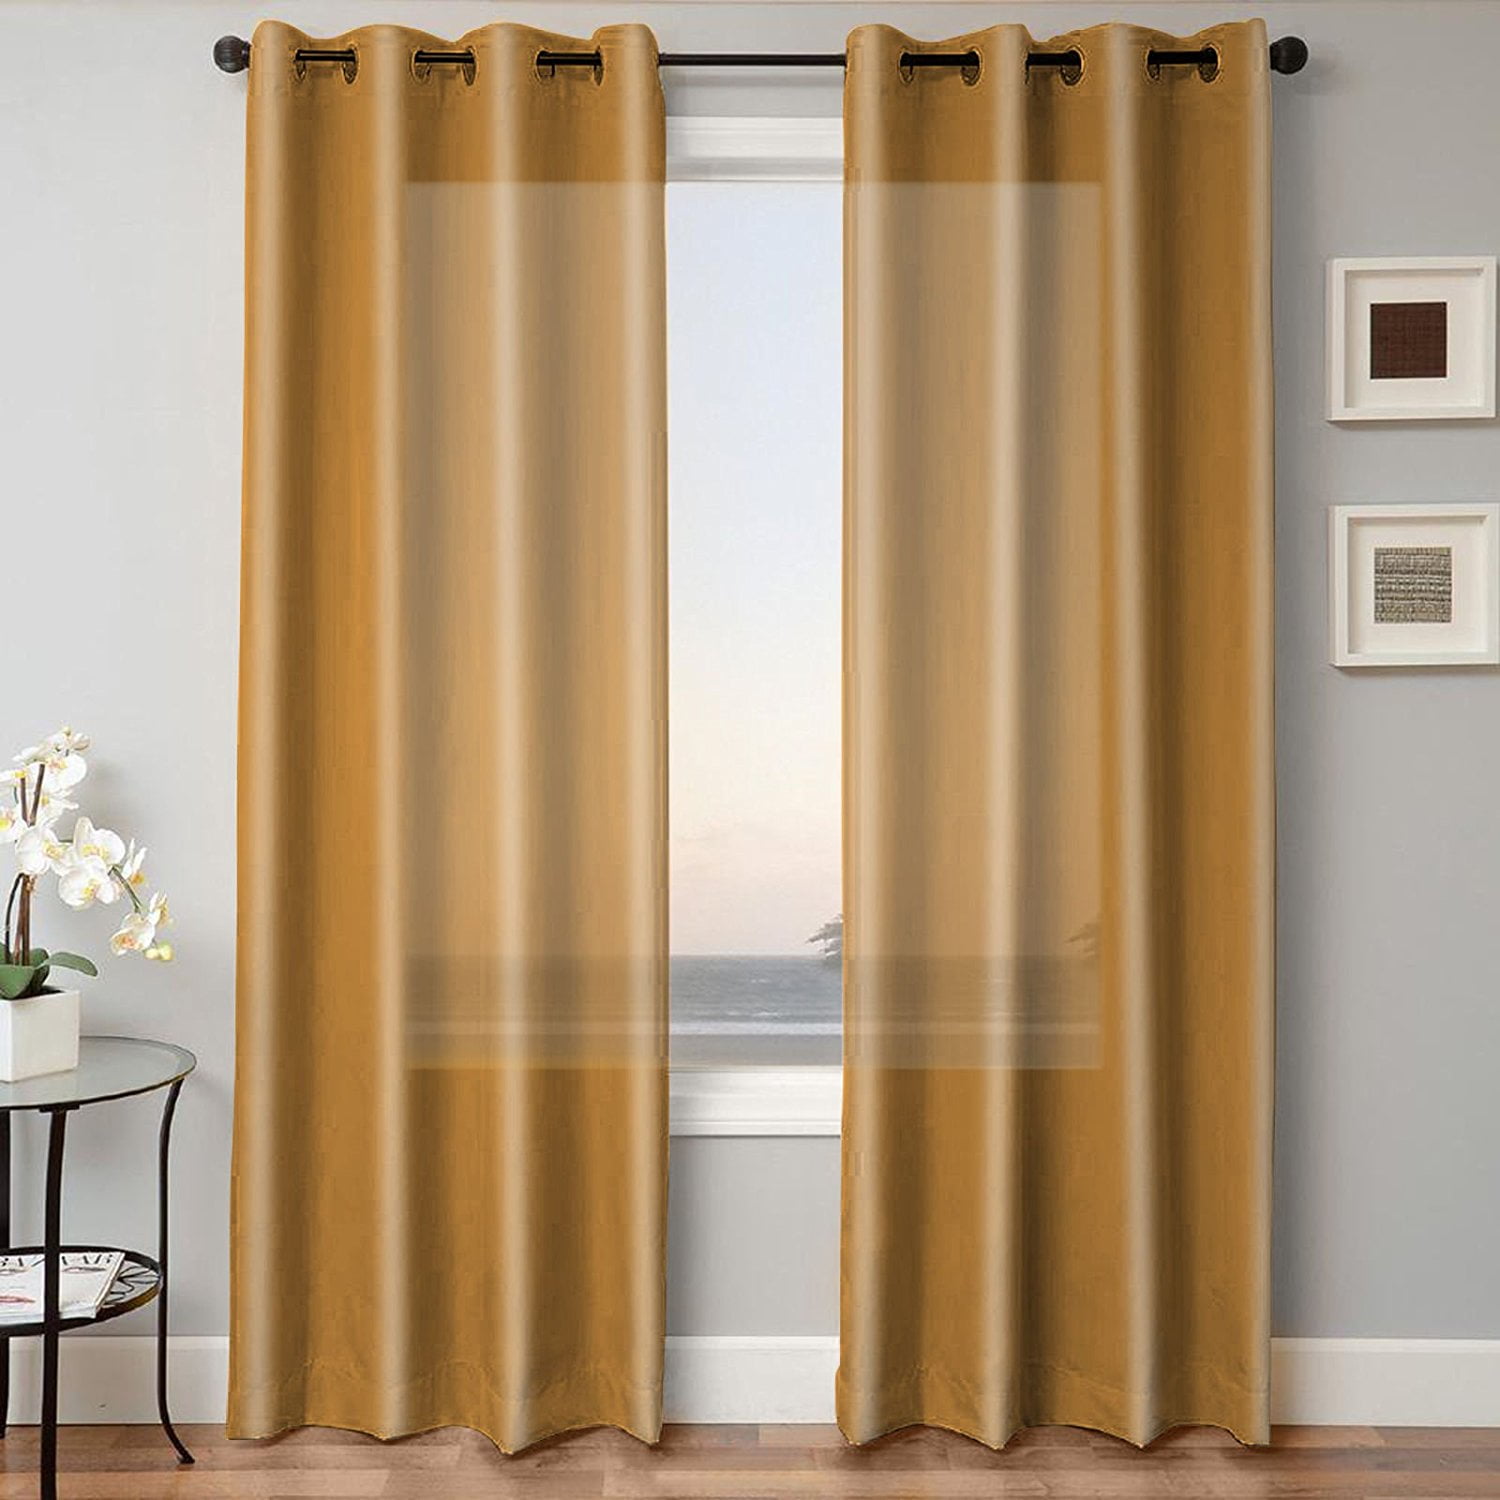 1 SOLID BRONZE 8 GROMMET SHEER WINDOW PANEL CURTAIN TREATME DRAPE RUBY GOLD 63" 